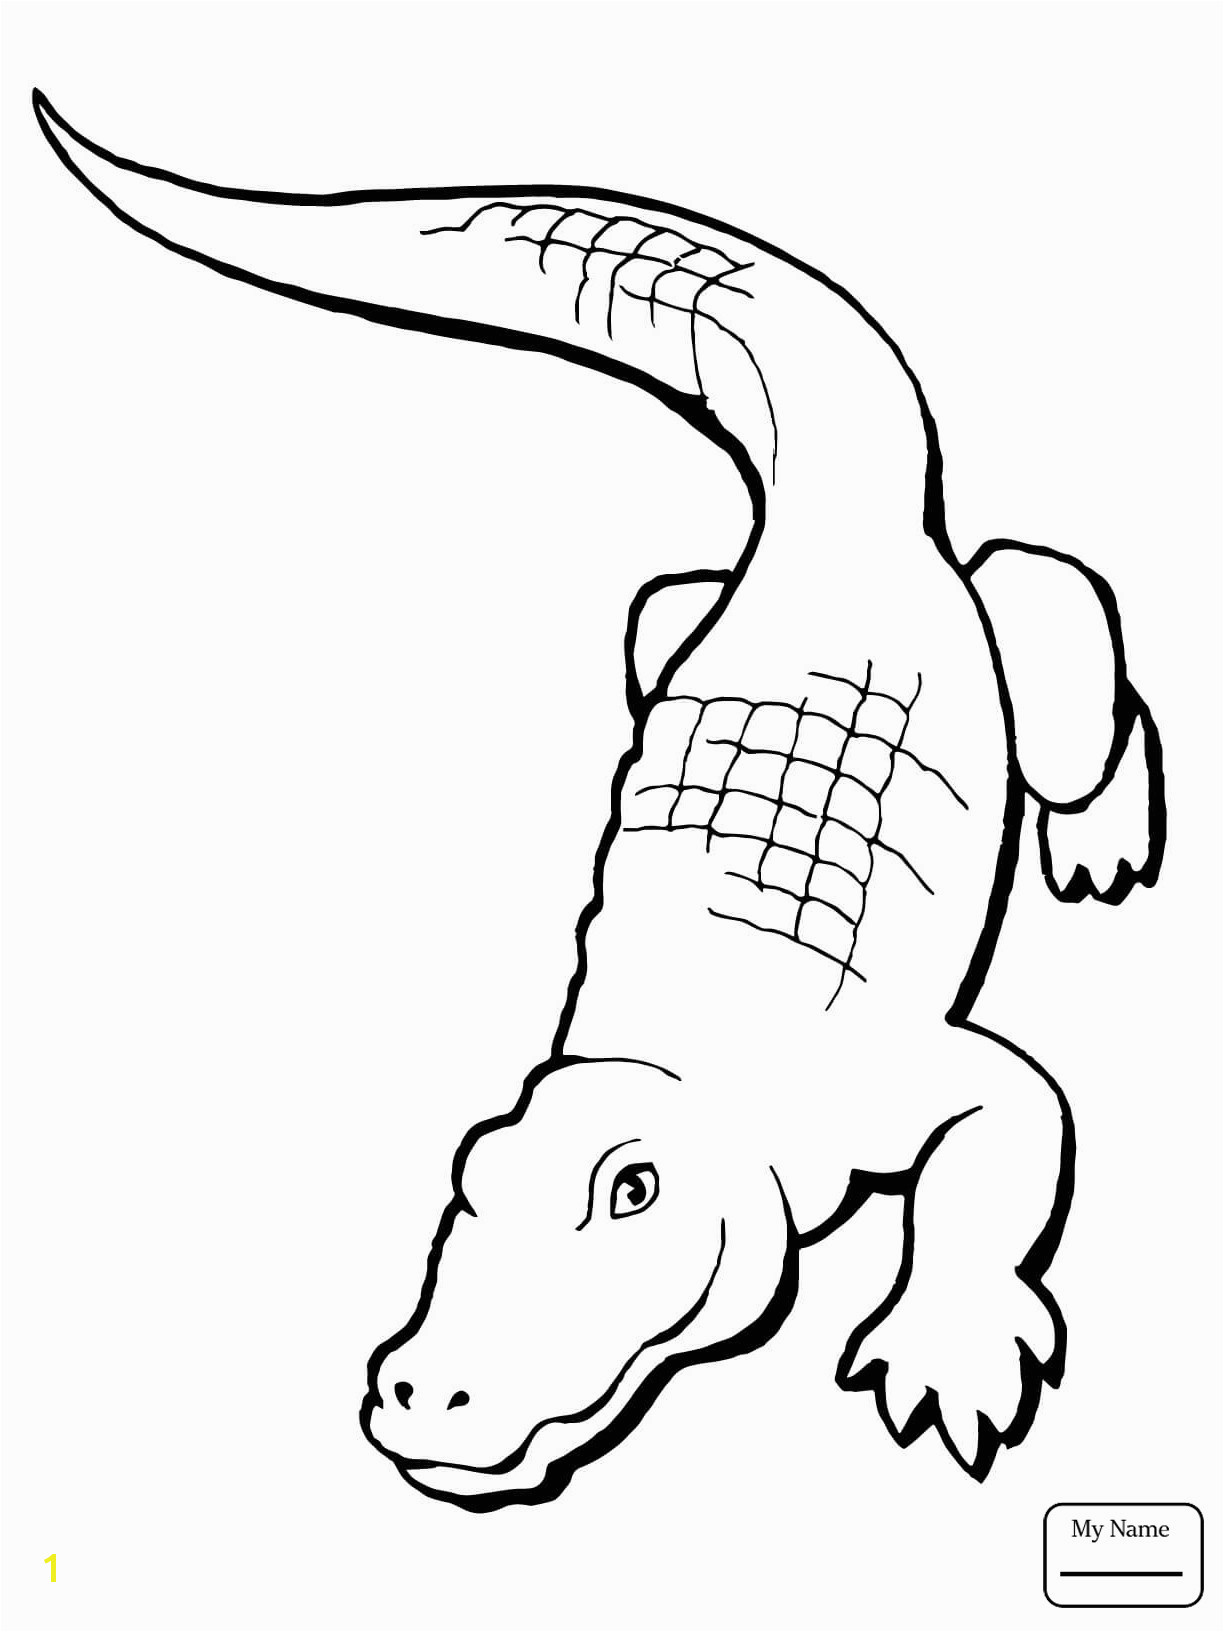 Alligator Gar Coloring Page American Alligator Coloring Page Fresh Reduced Polar Bear to Color